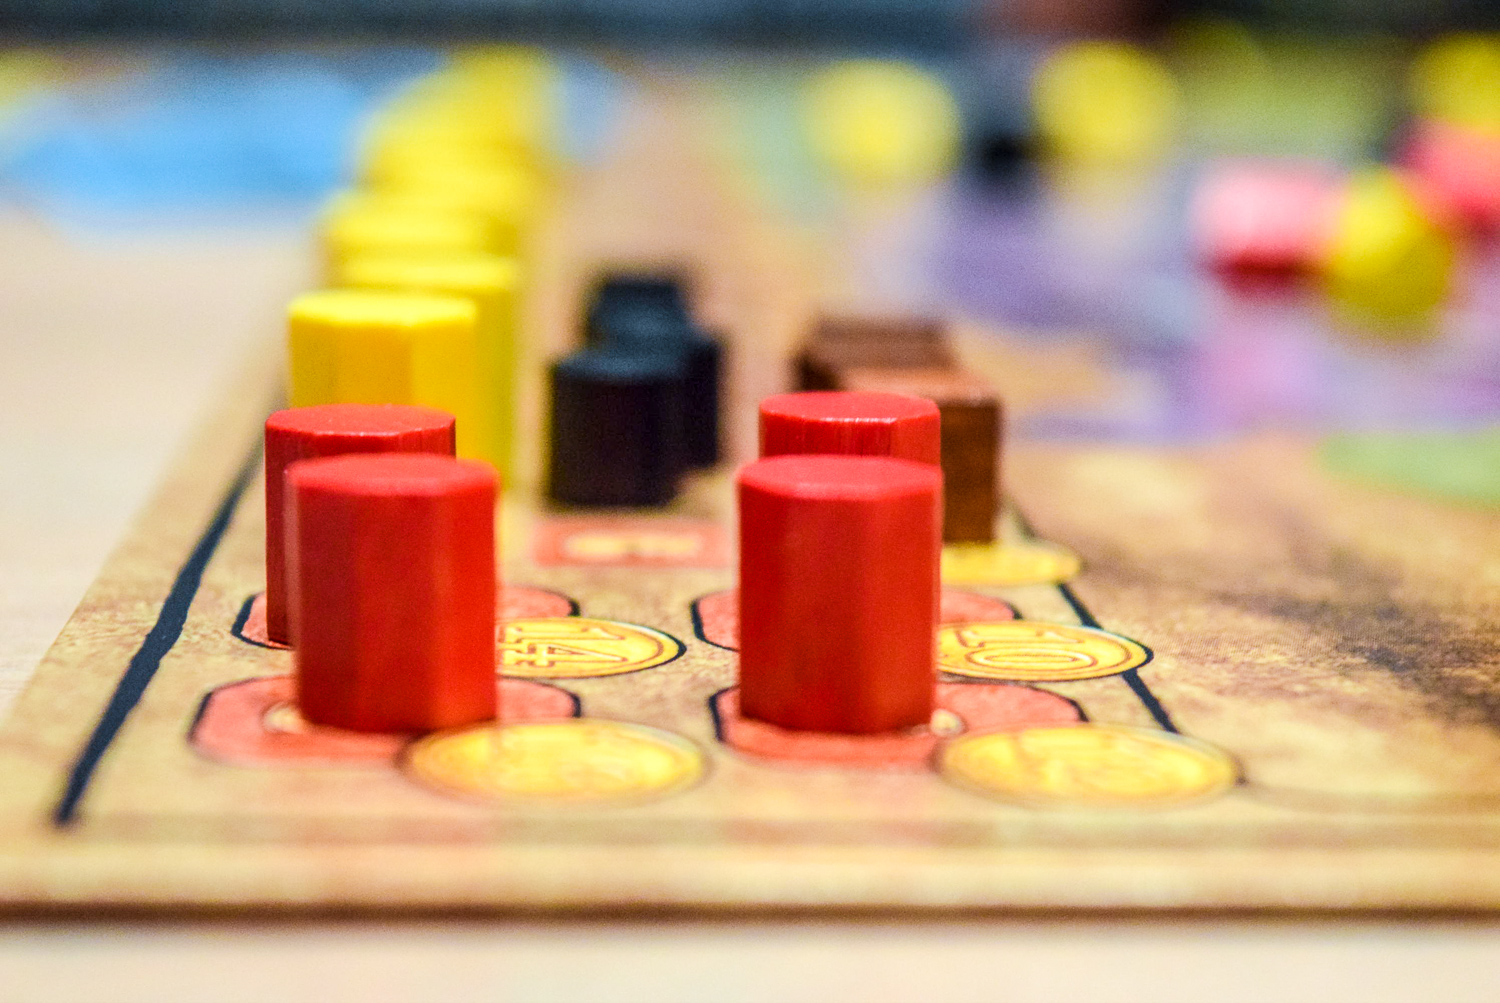 Resources for Power Grid Board Game up close